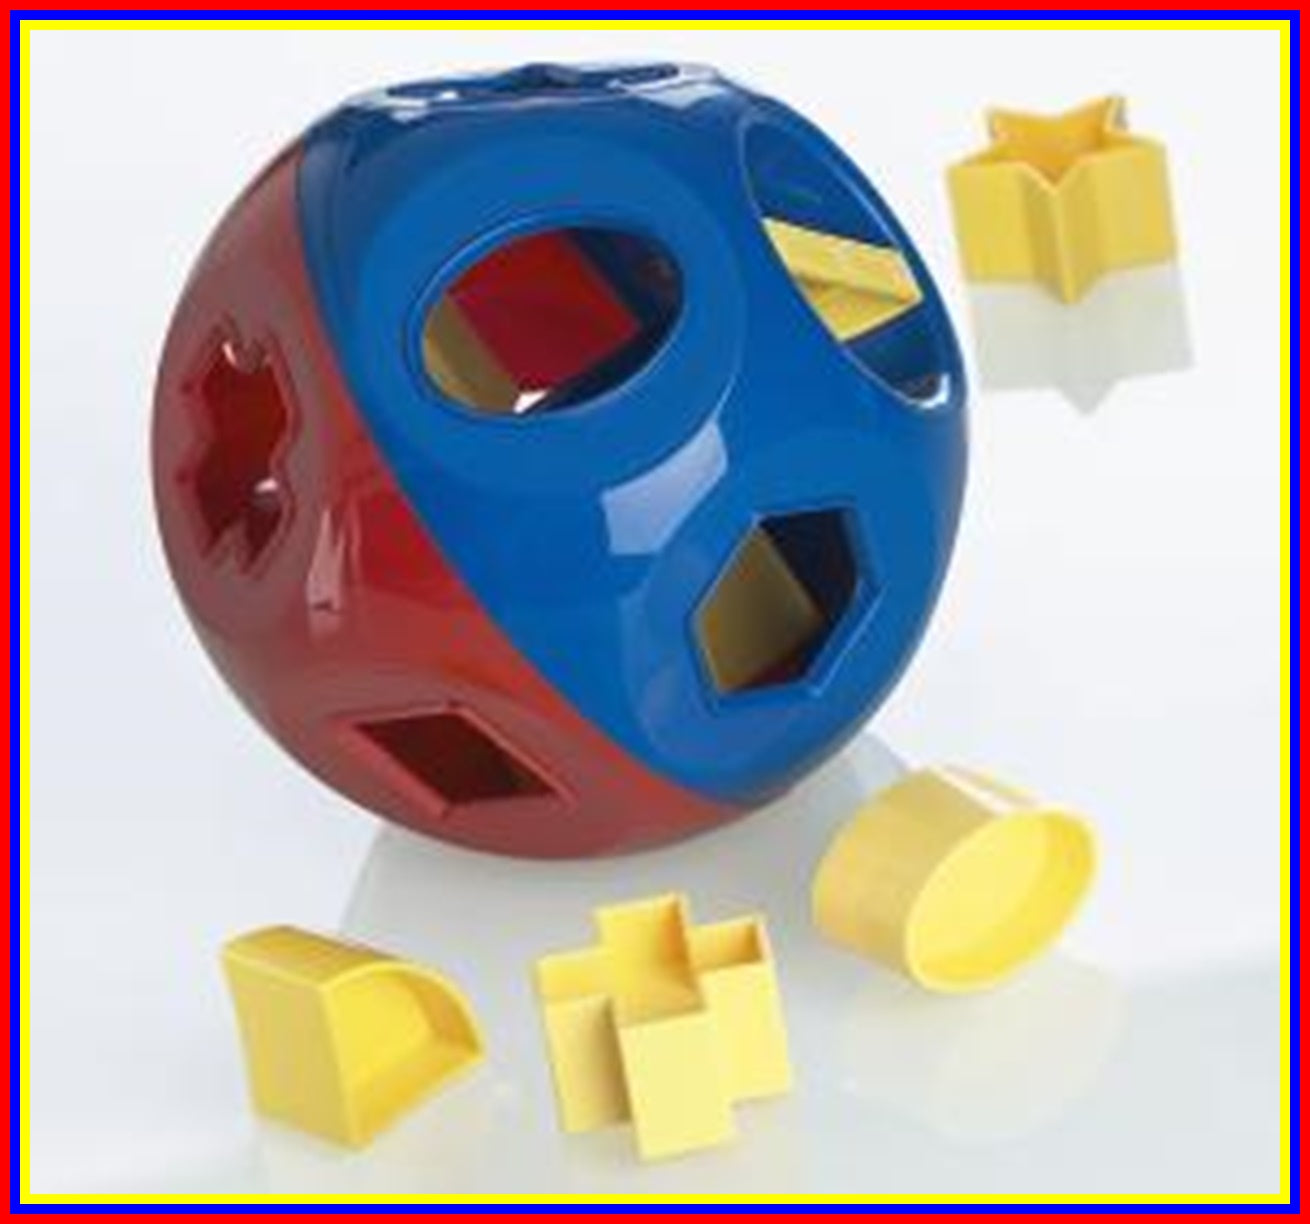 Tupperware ORIGINAL SHAPE-O-TOY KIDS EDUCATIONAL BALL PUZZLE PRIMARY RED BLUE AND YELLOW - Plastic Glass and Wax ~ PGW